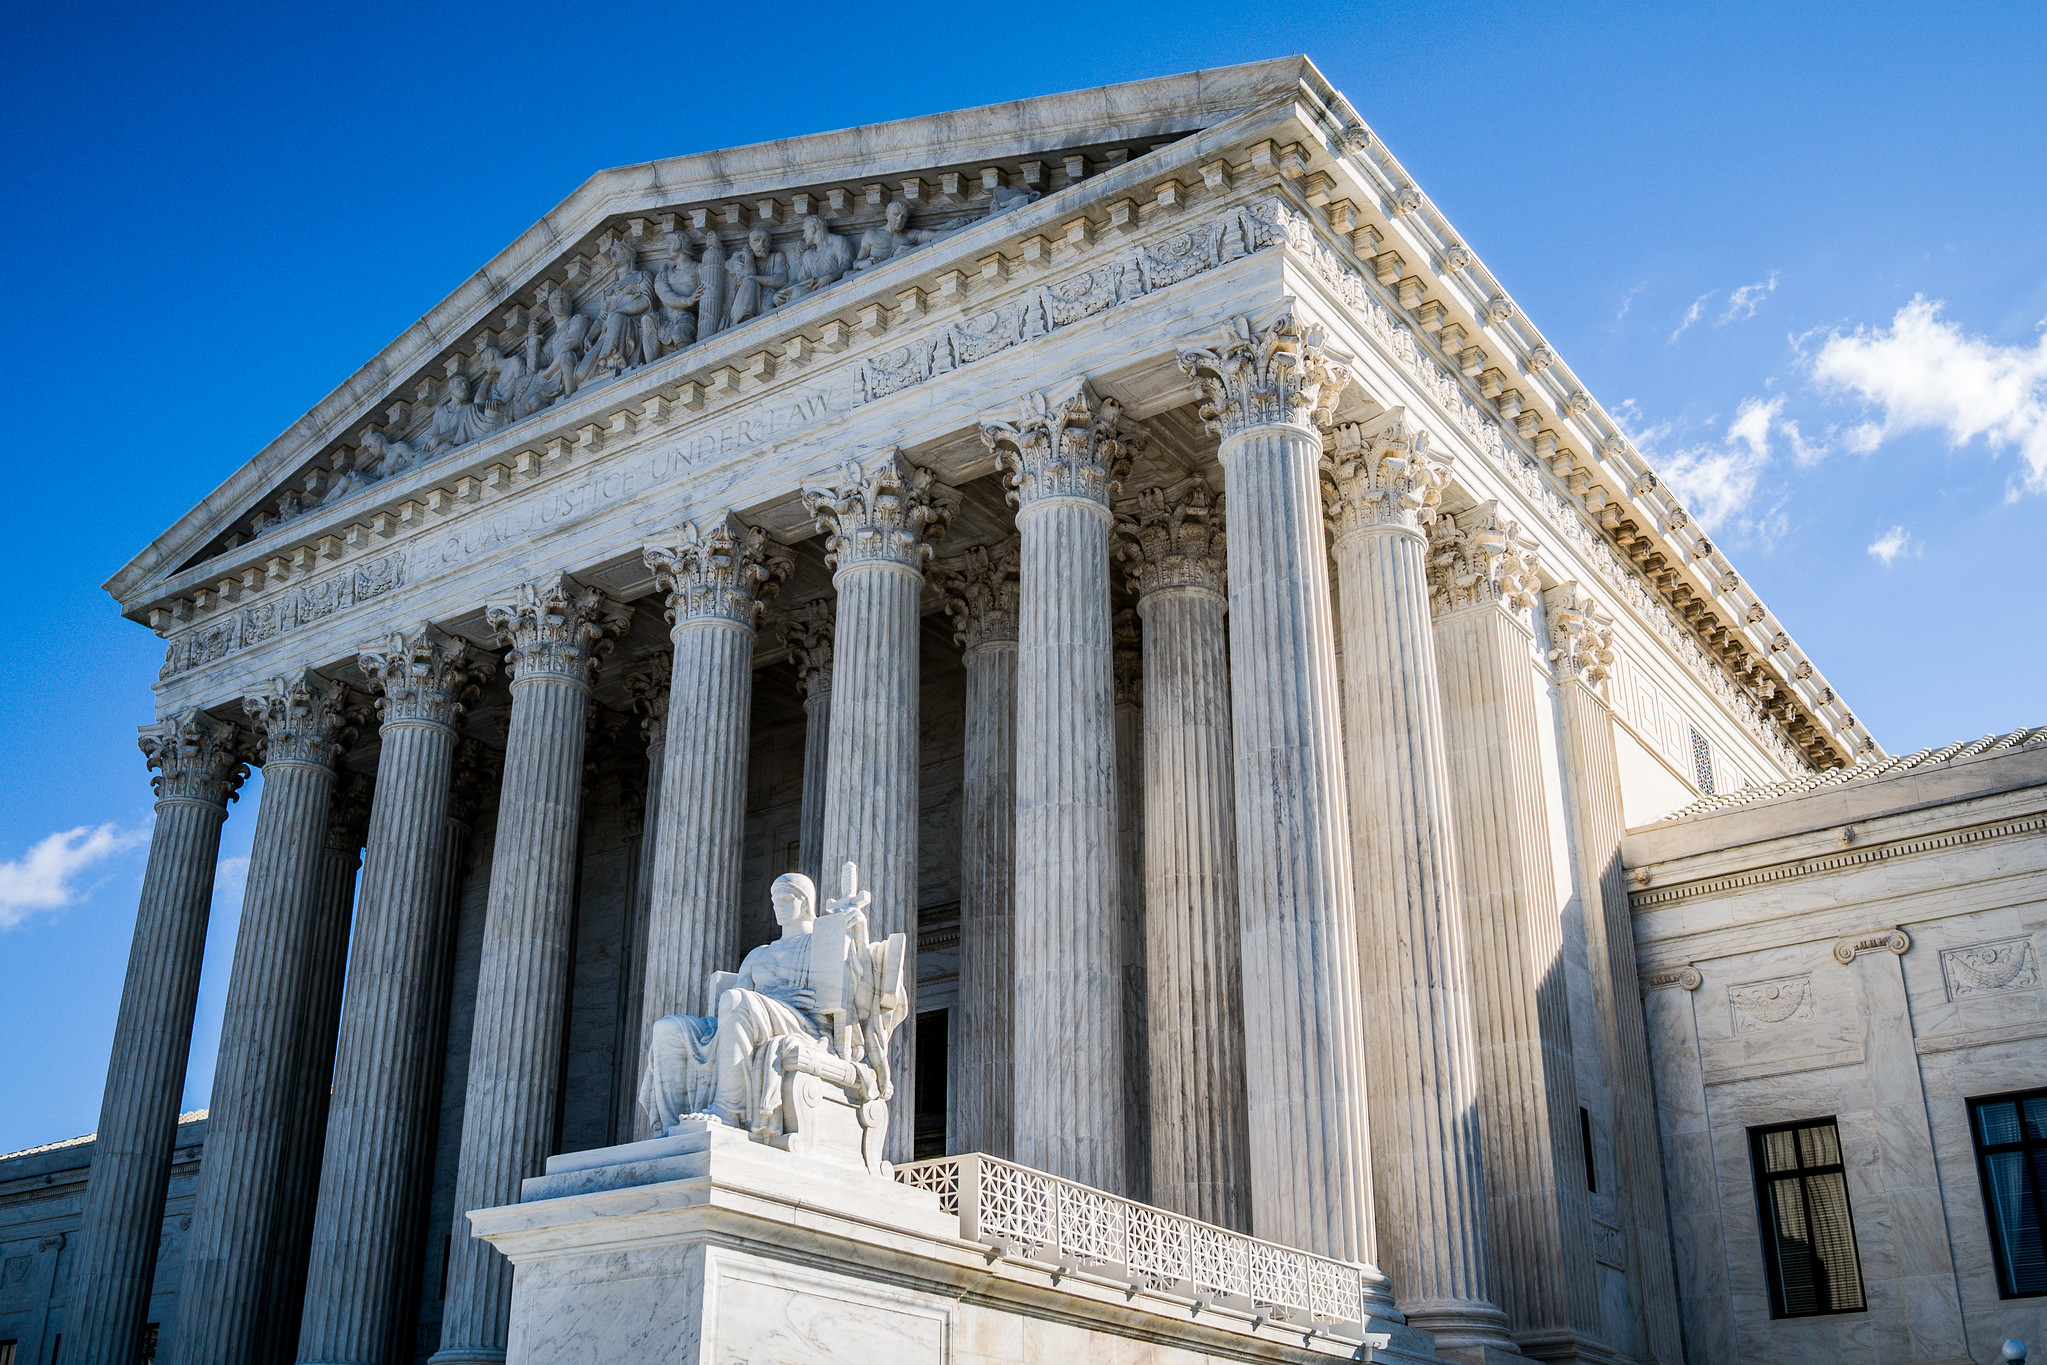 Supreme Court Takes a Pass on Early Review of Antitrust Challenge